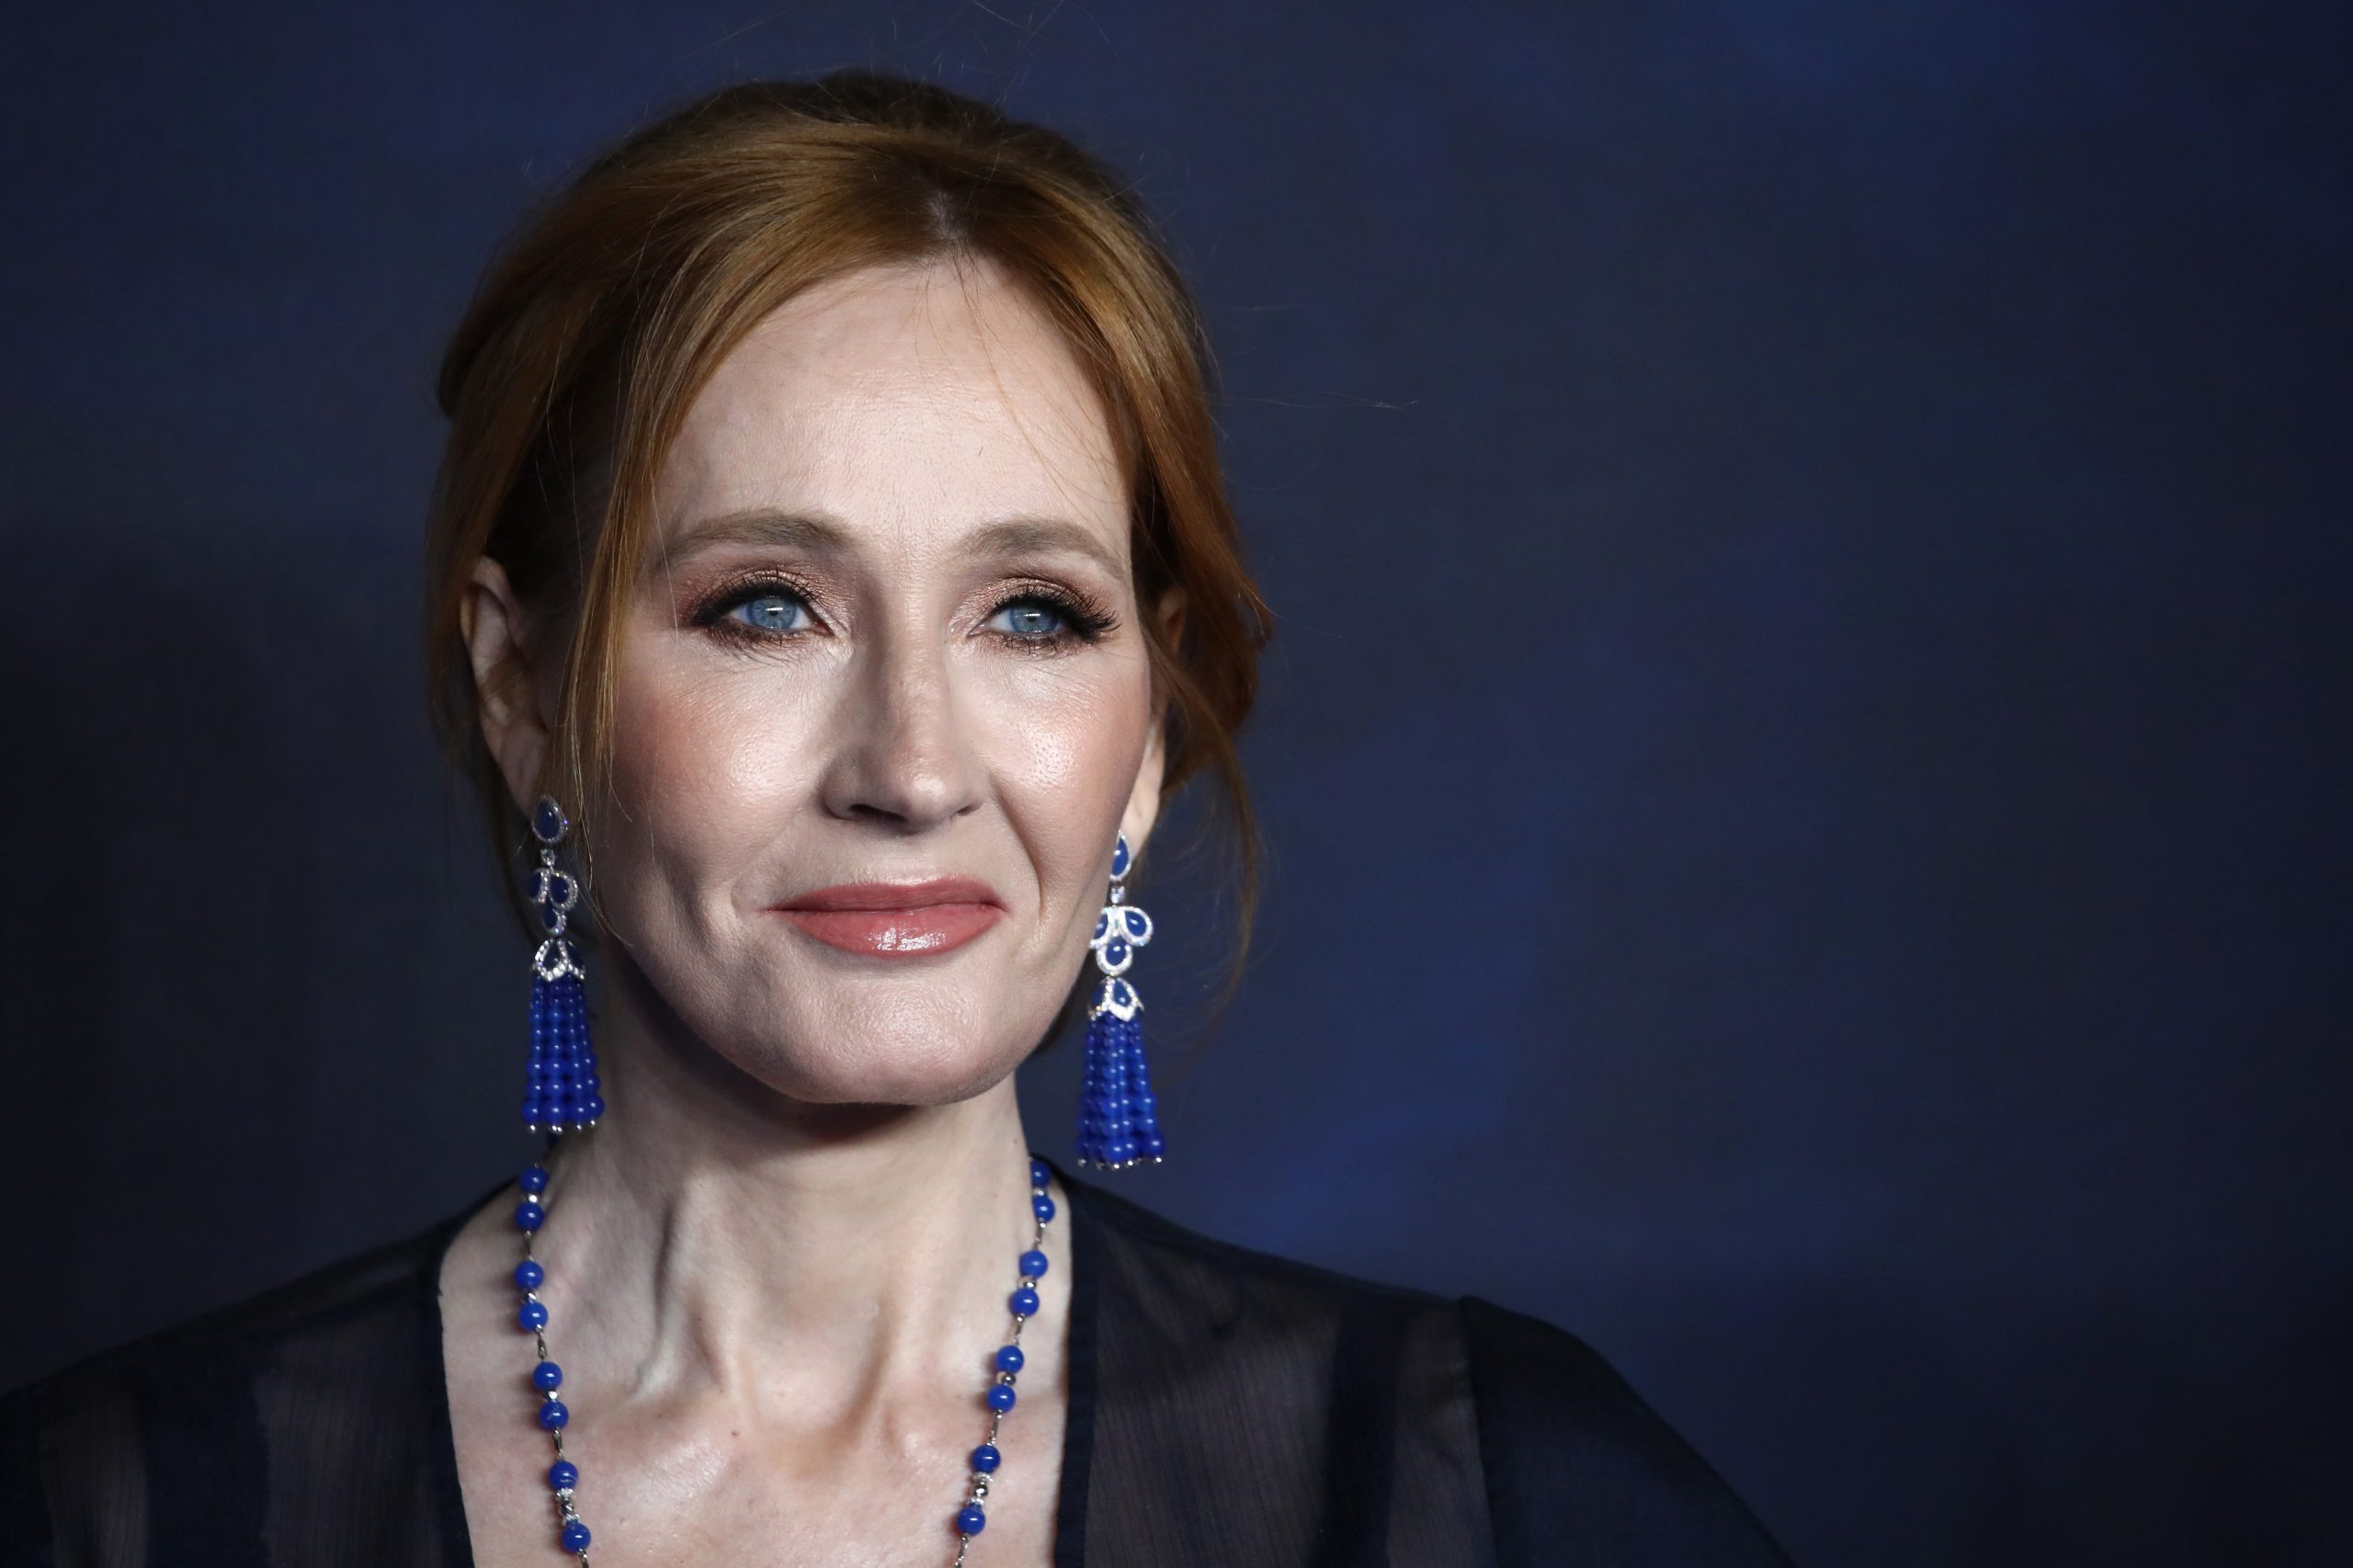 He had the last word: JK Rowling to confirm cast of Harry Potter series